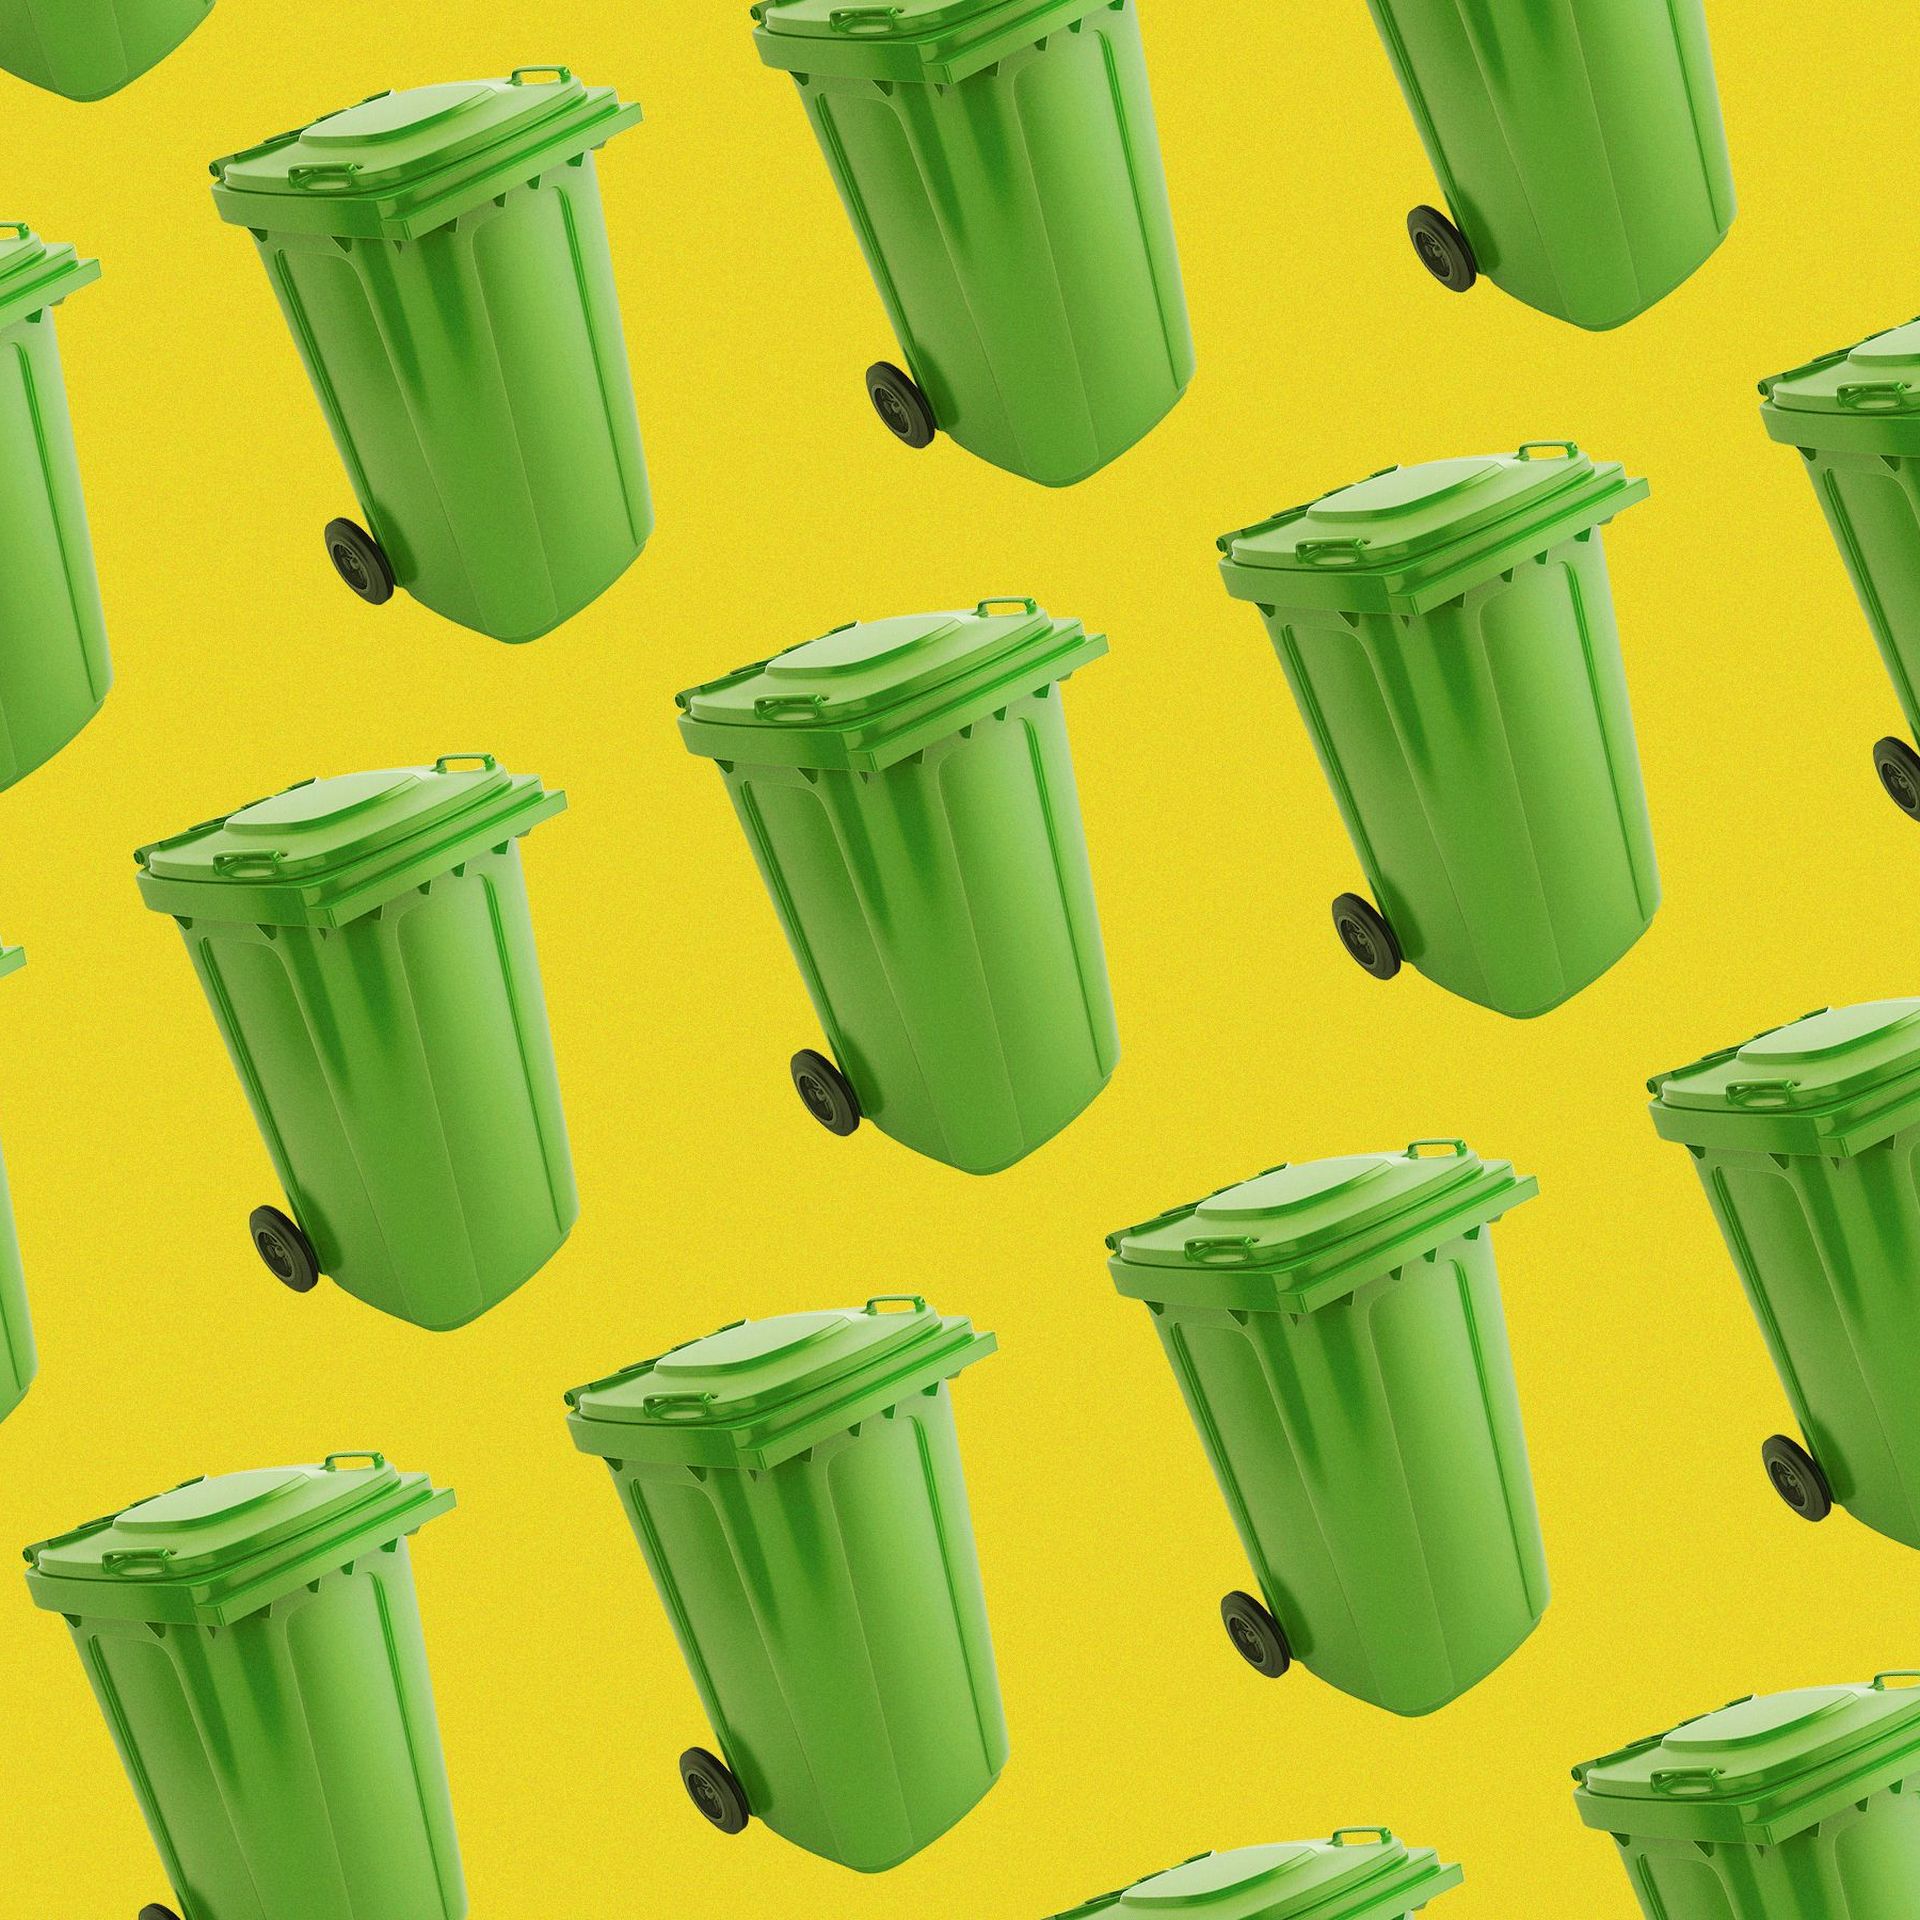 Illustration of a pattern of trash cans.